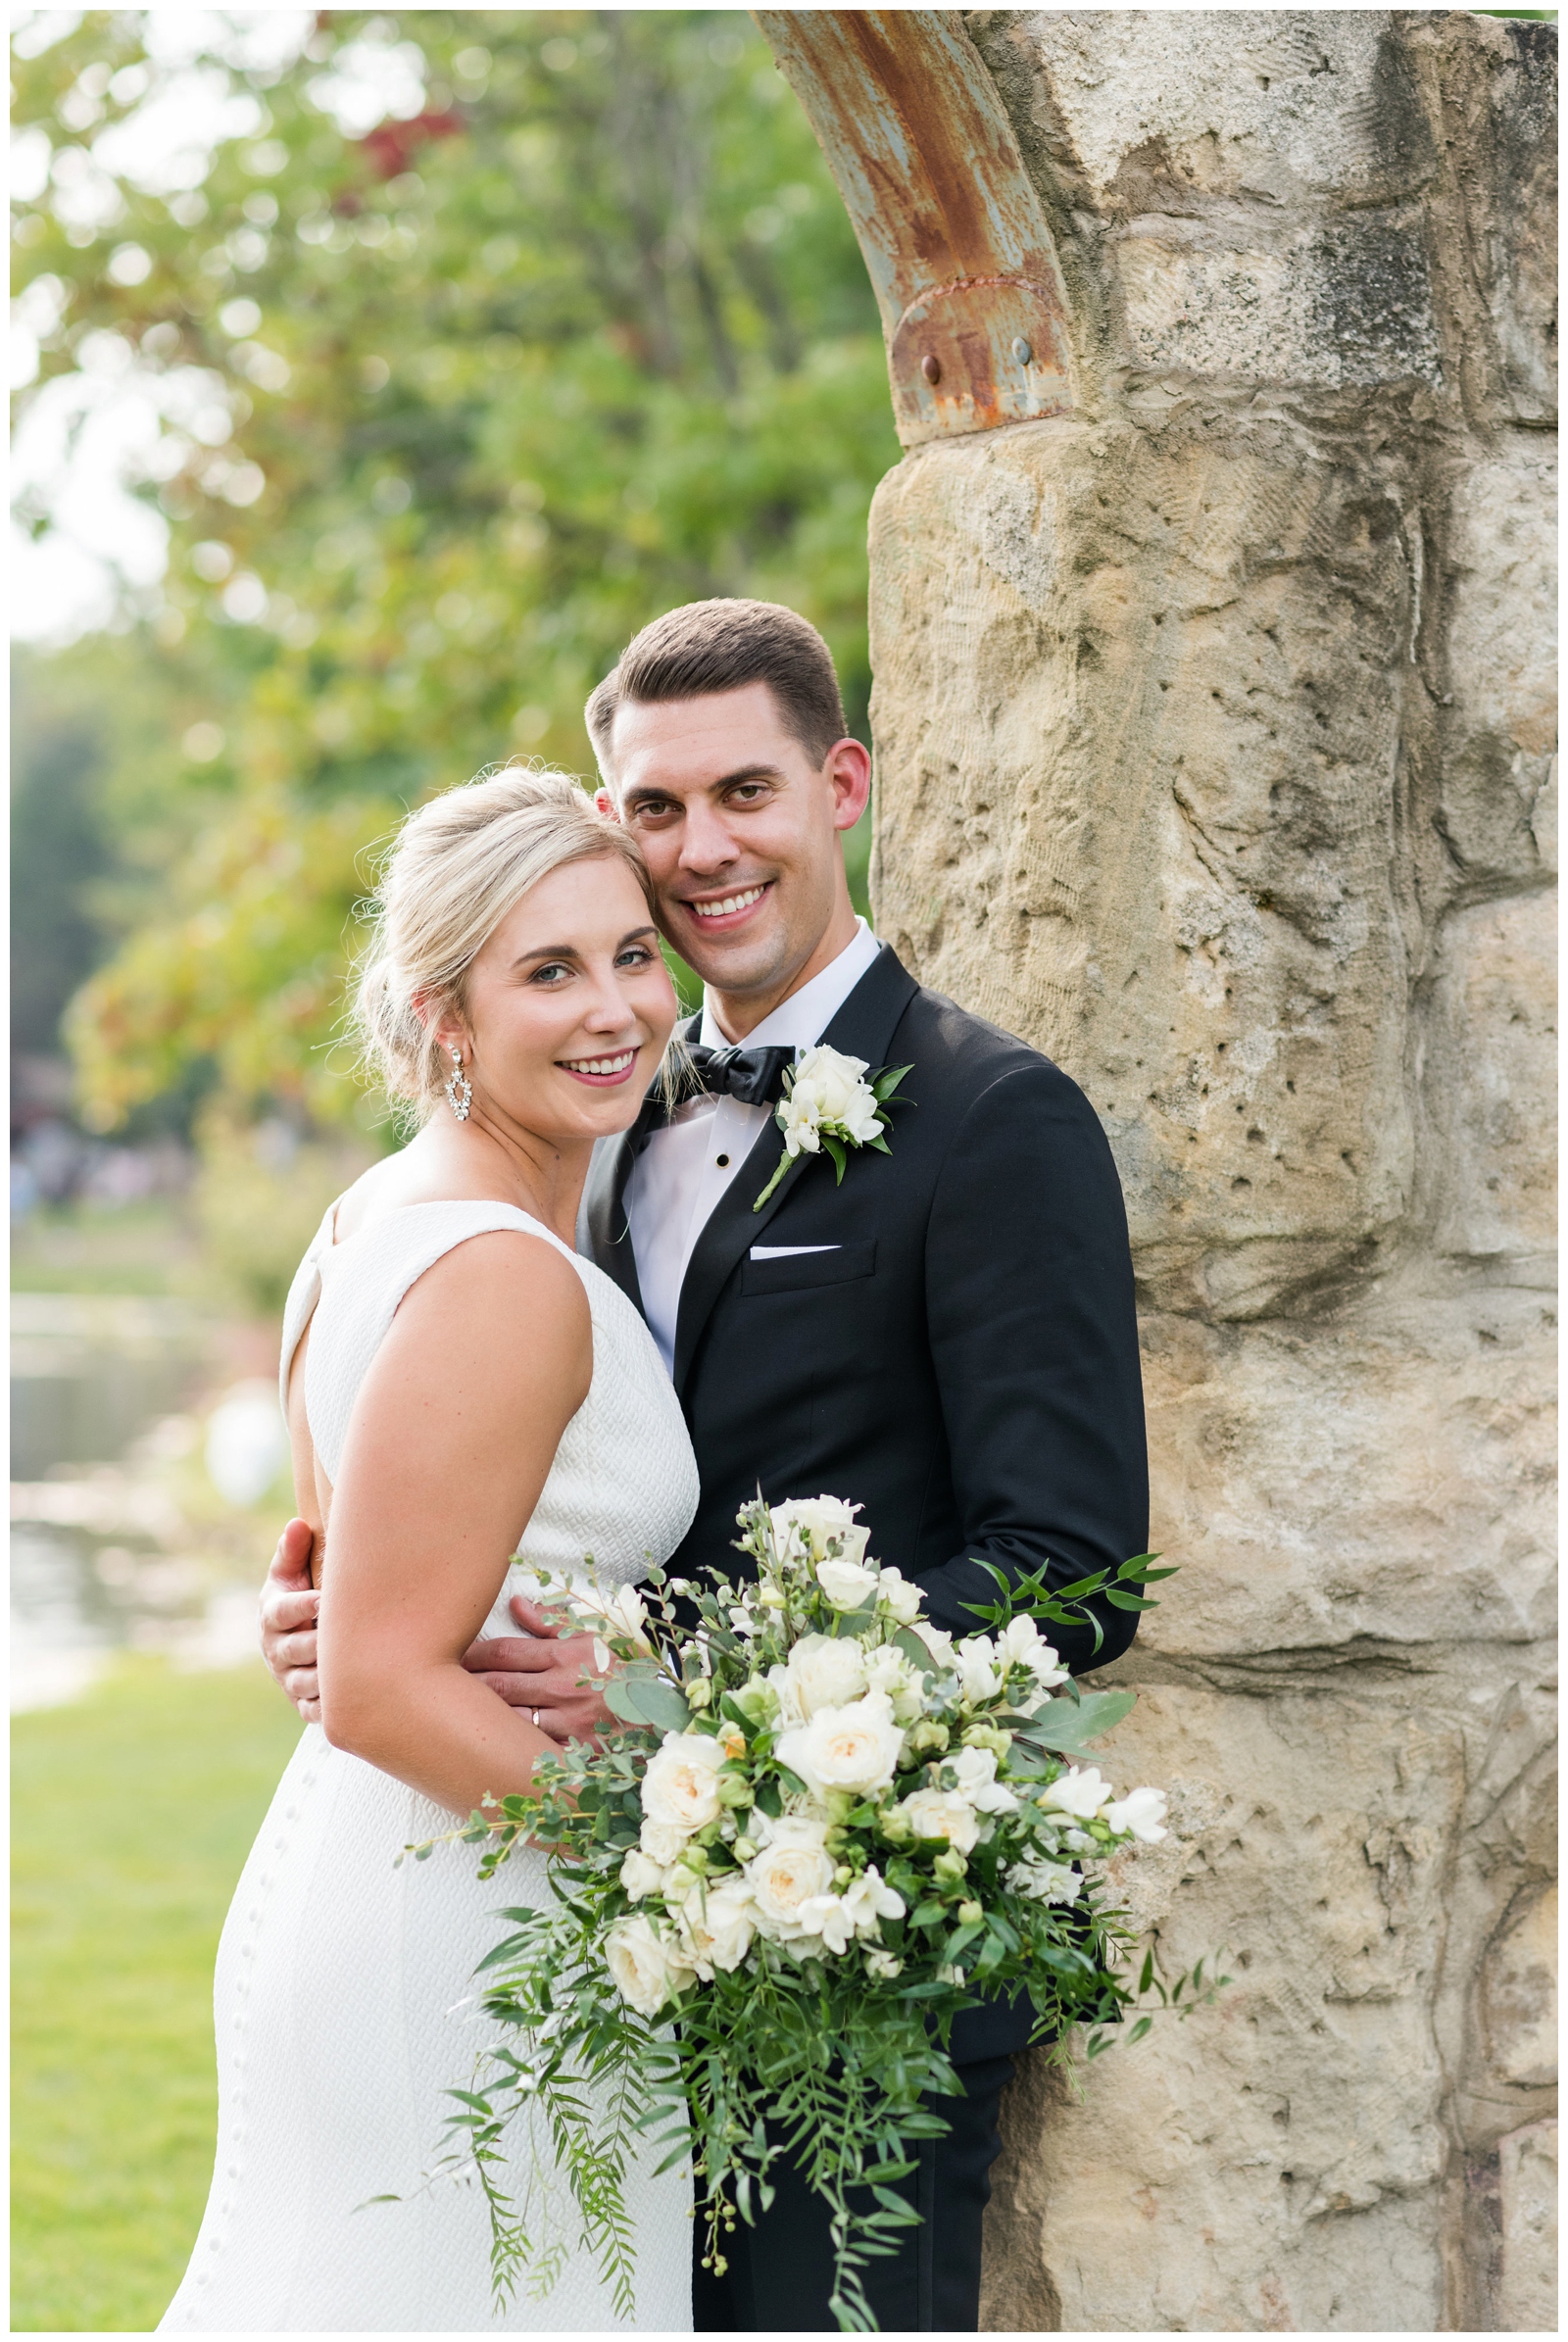 groom in tux with white boutonnière and bride with all-white bouquet hug at Gervasi Vineyard